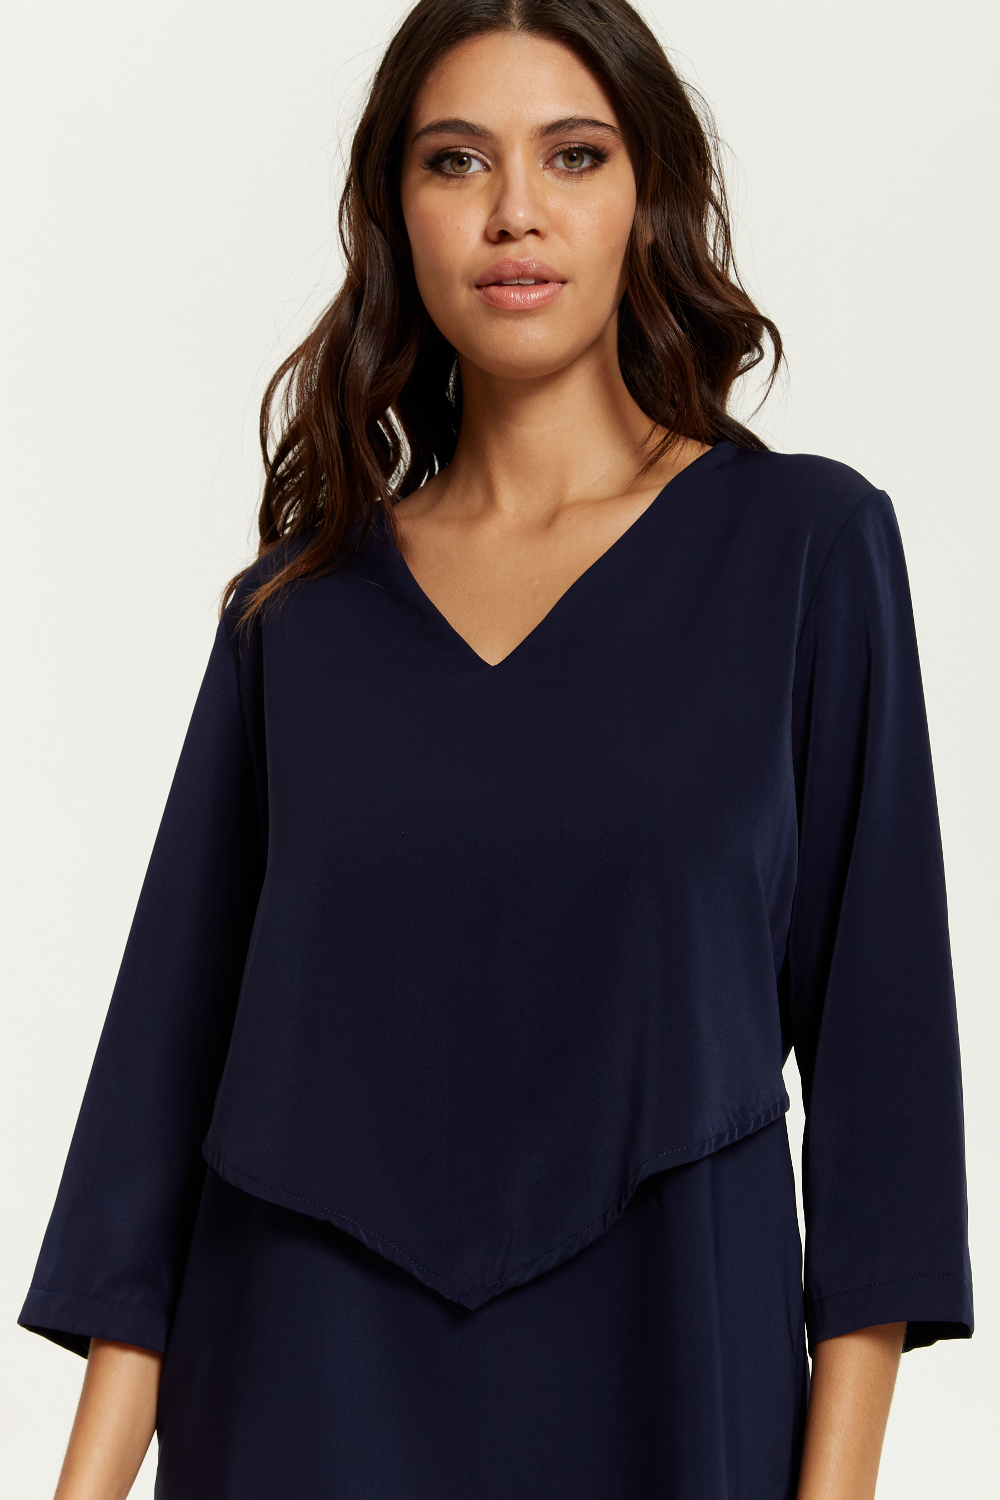 3/4 Sleeves V Neck Layered Relaxed Fit Top in Navy GLR FASHION NETWORKING